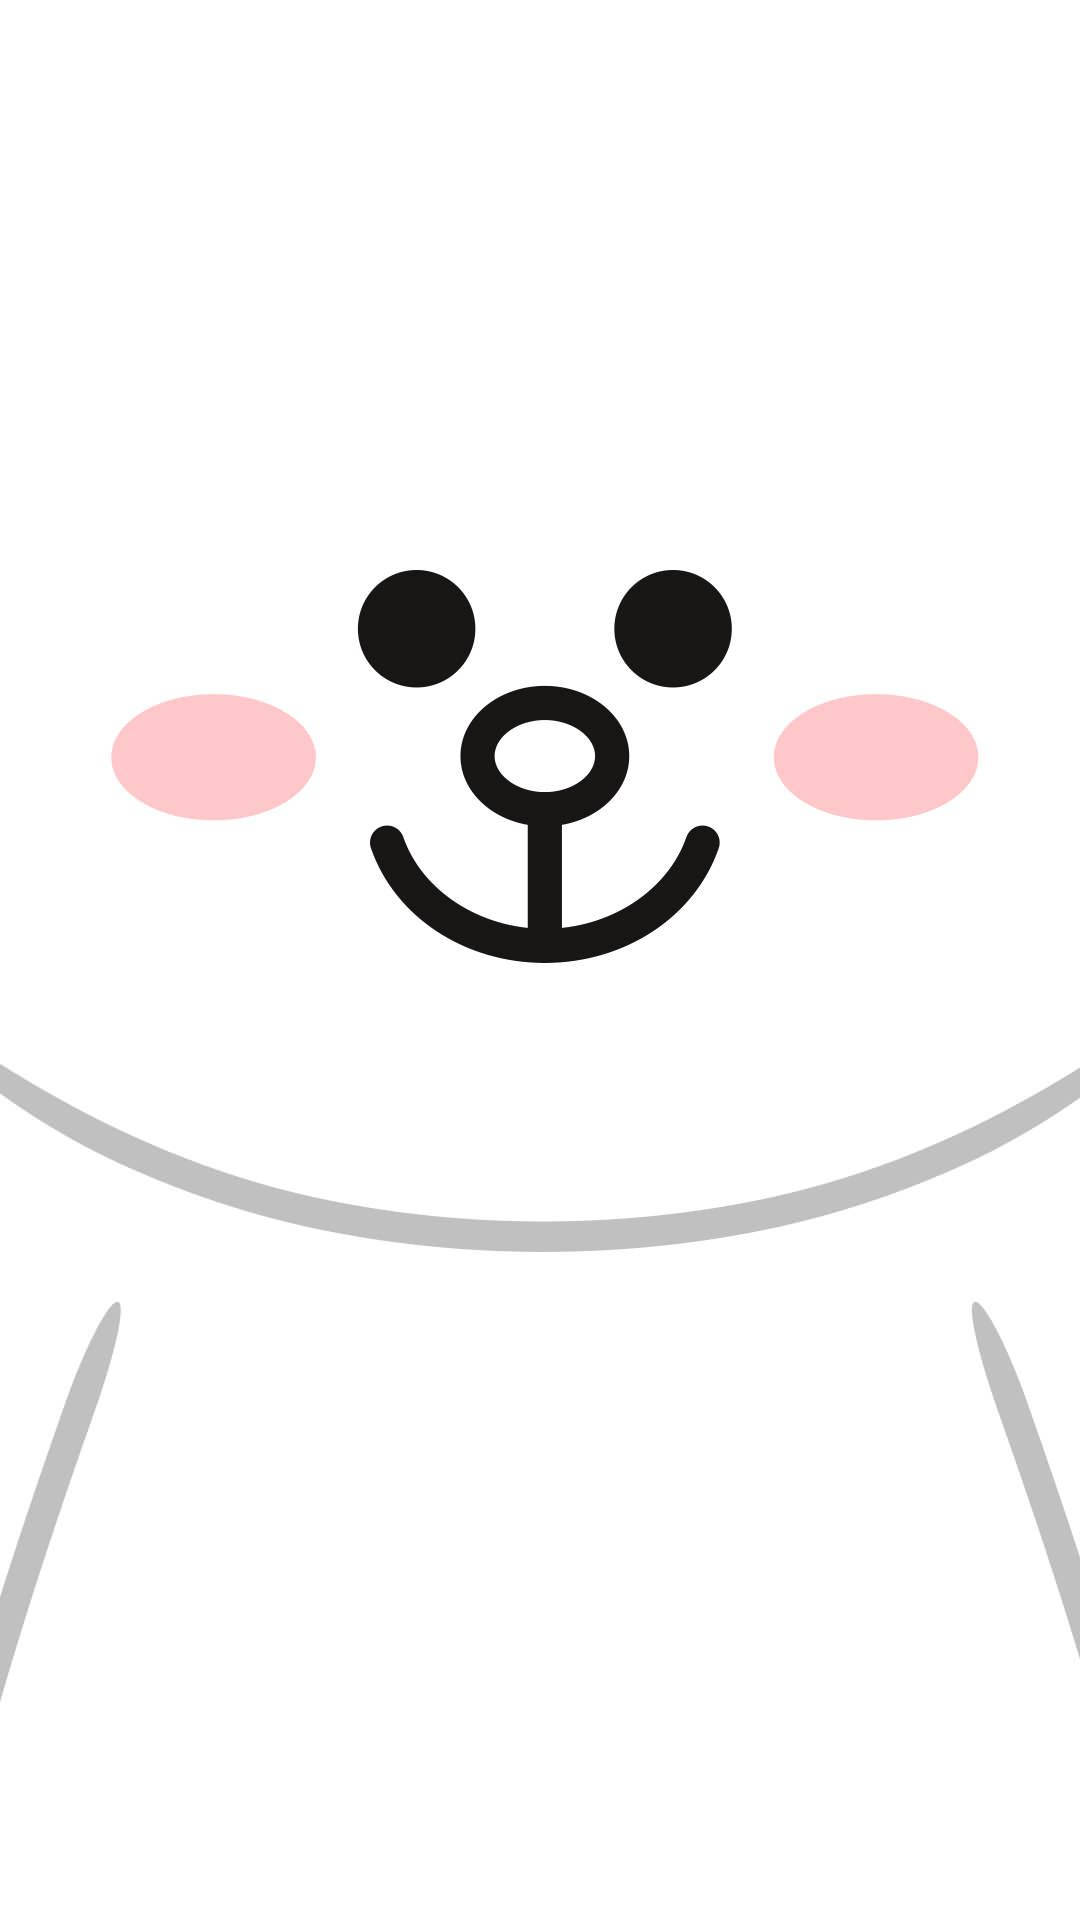 Enjoy a Happy Moment with Cony! Wallpaper